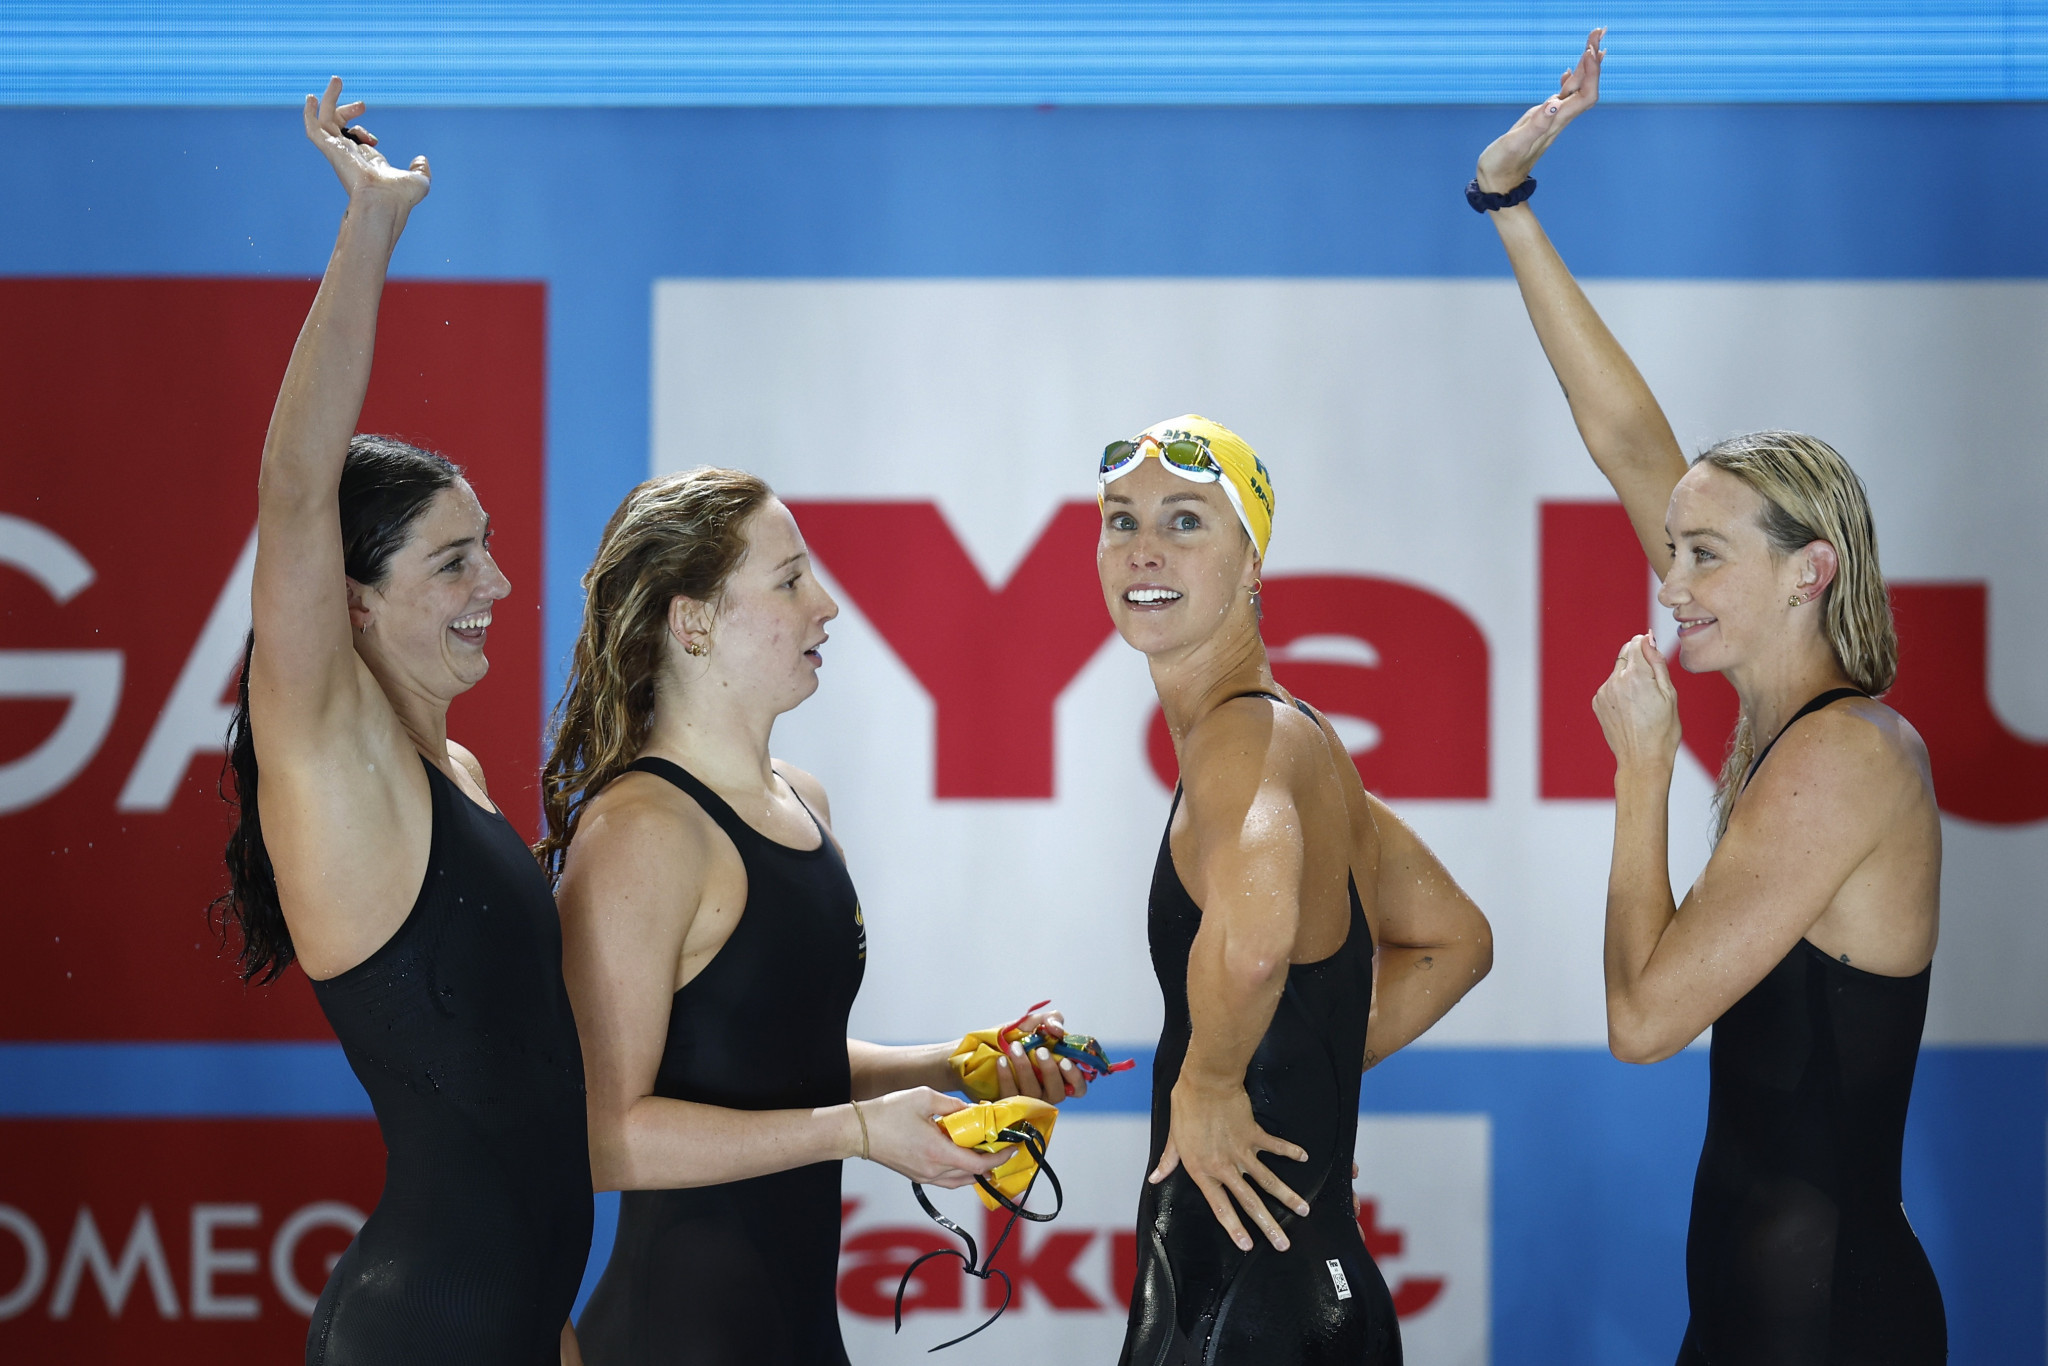 Australia claimed two golds on the opening day of the World Swimming Championships (25m) in Melbourne ©Getty Images